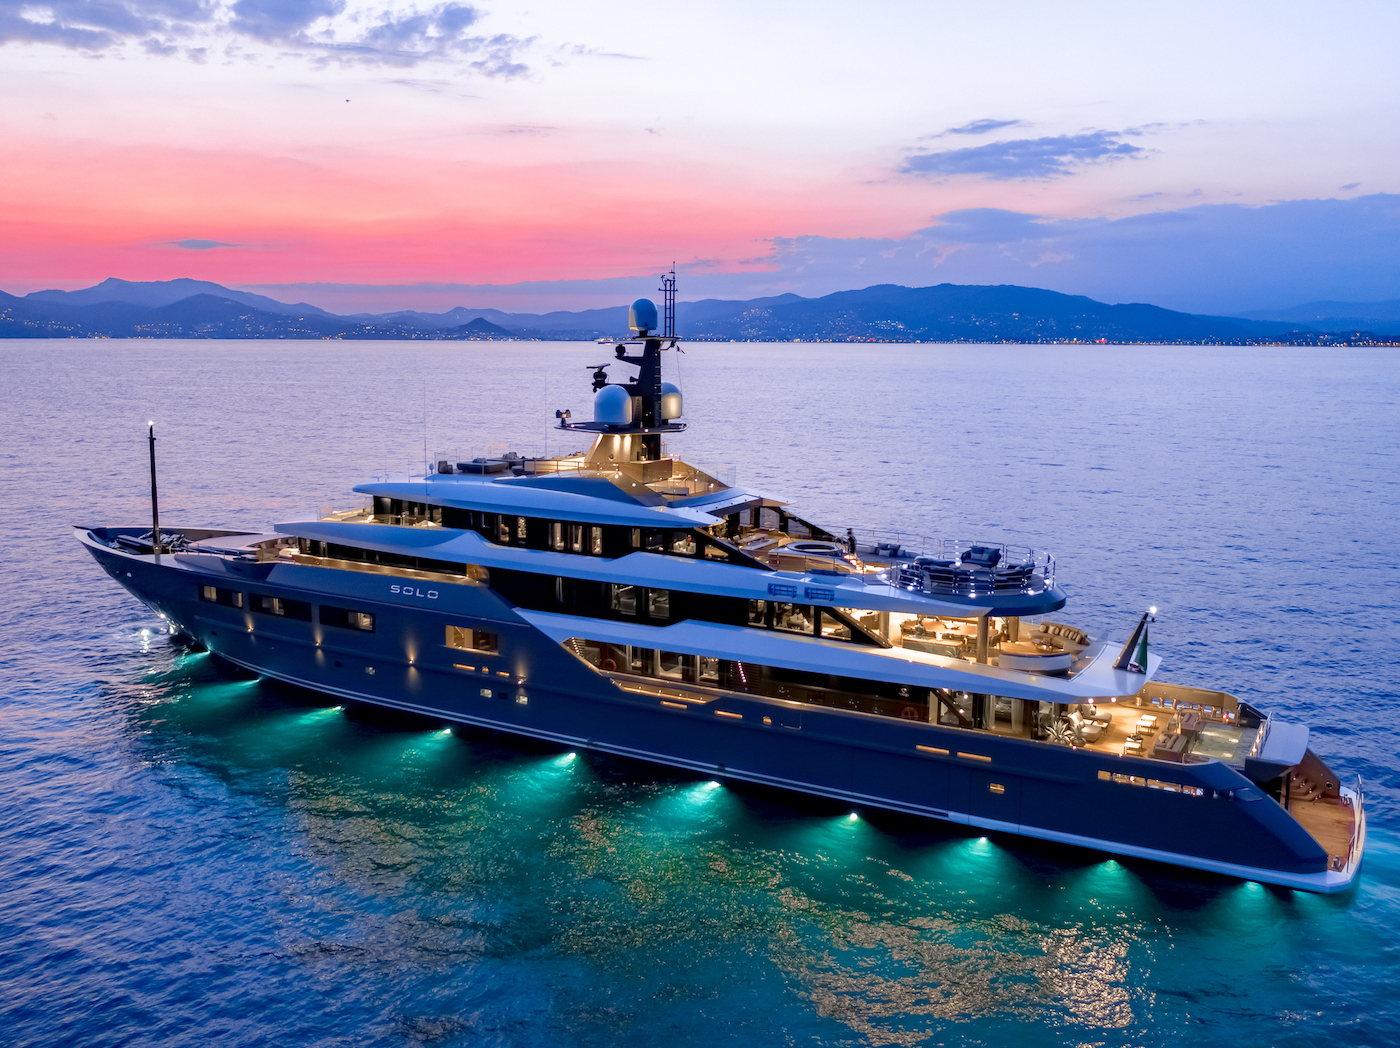 yacht pic download